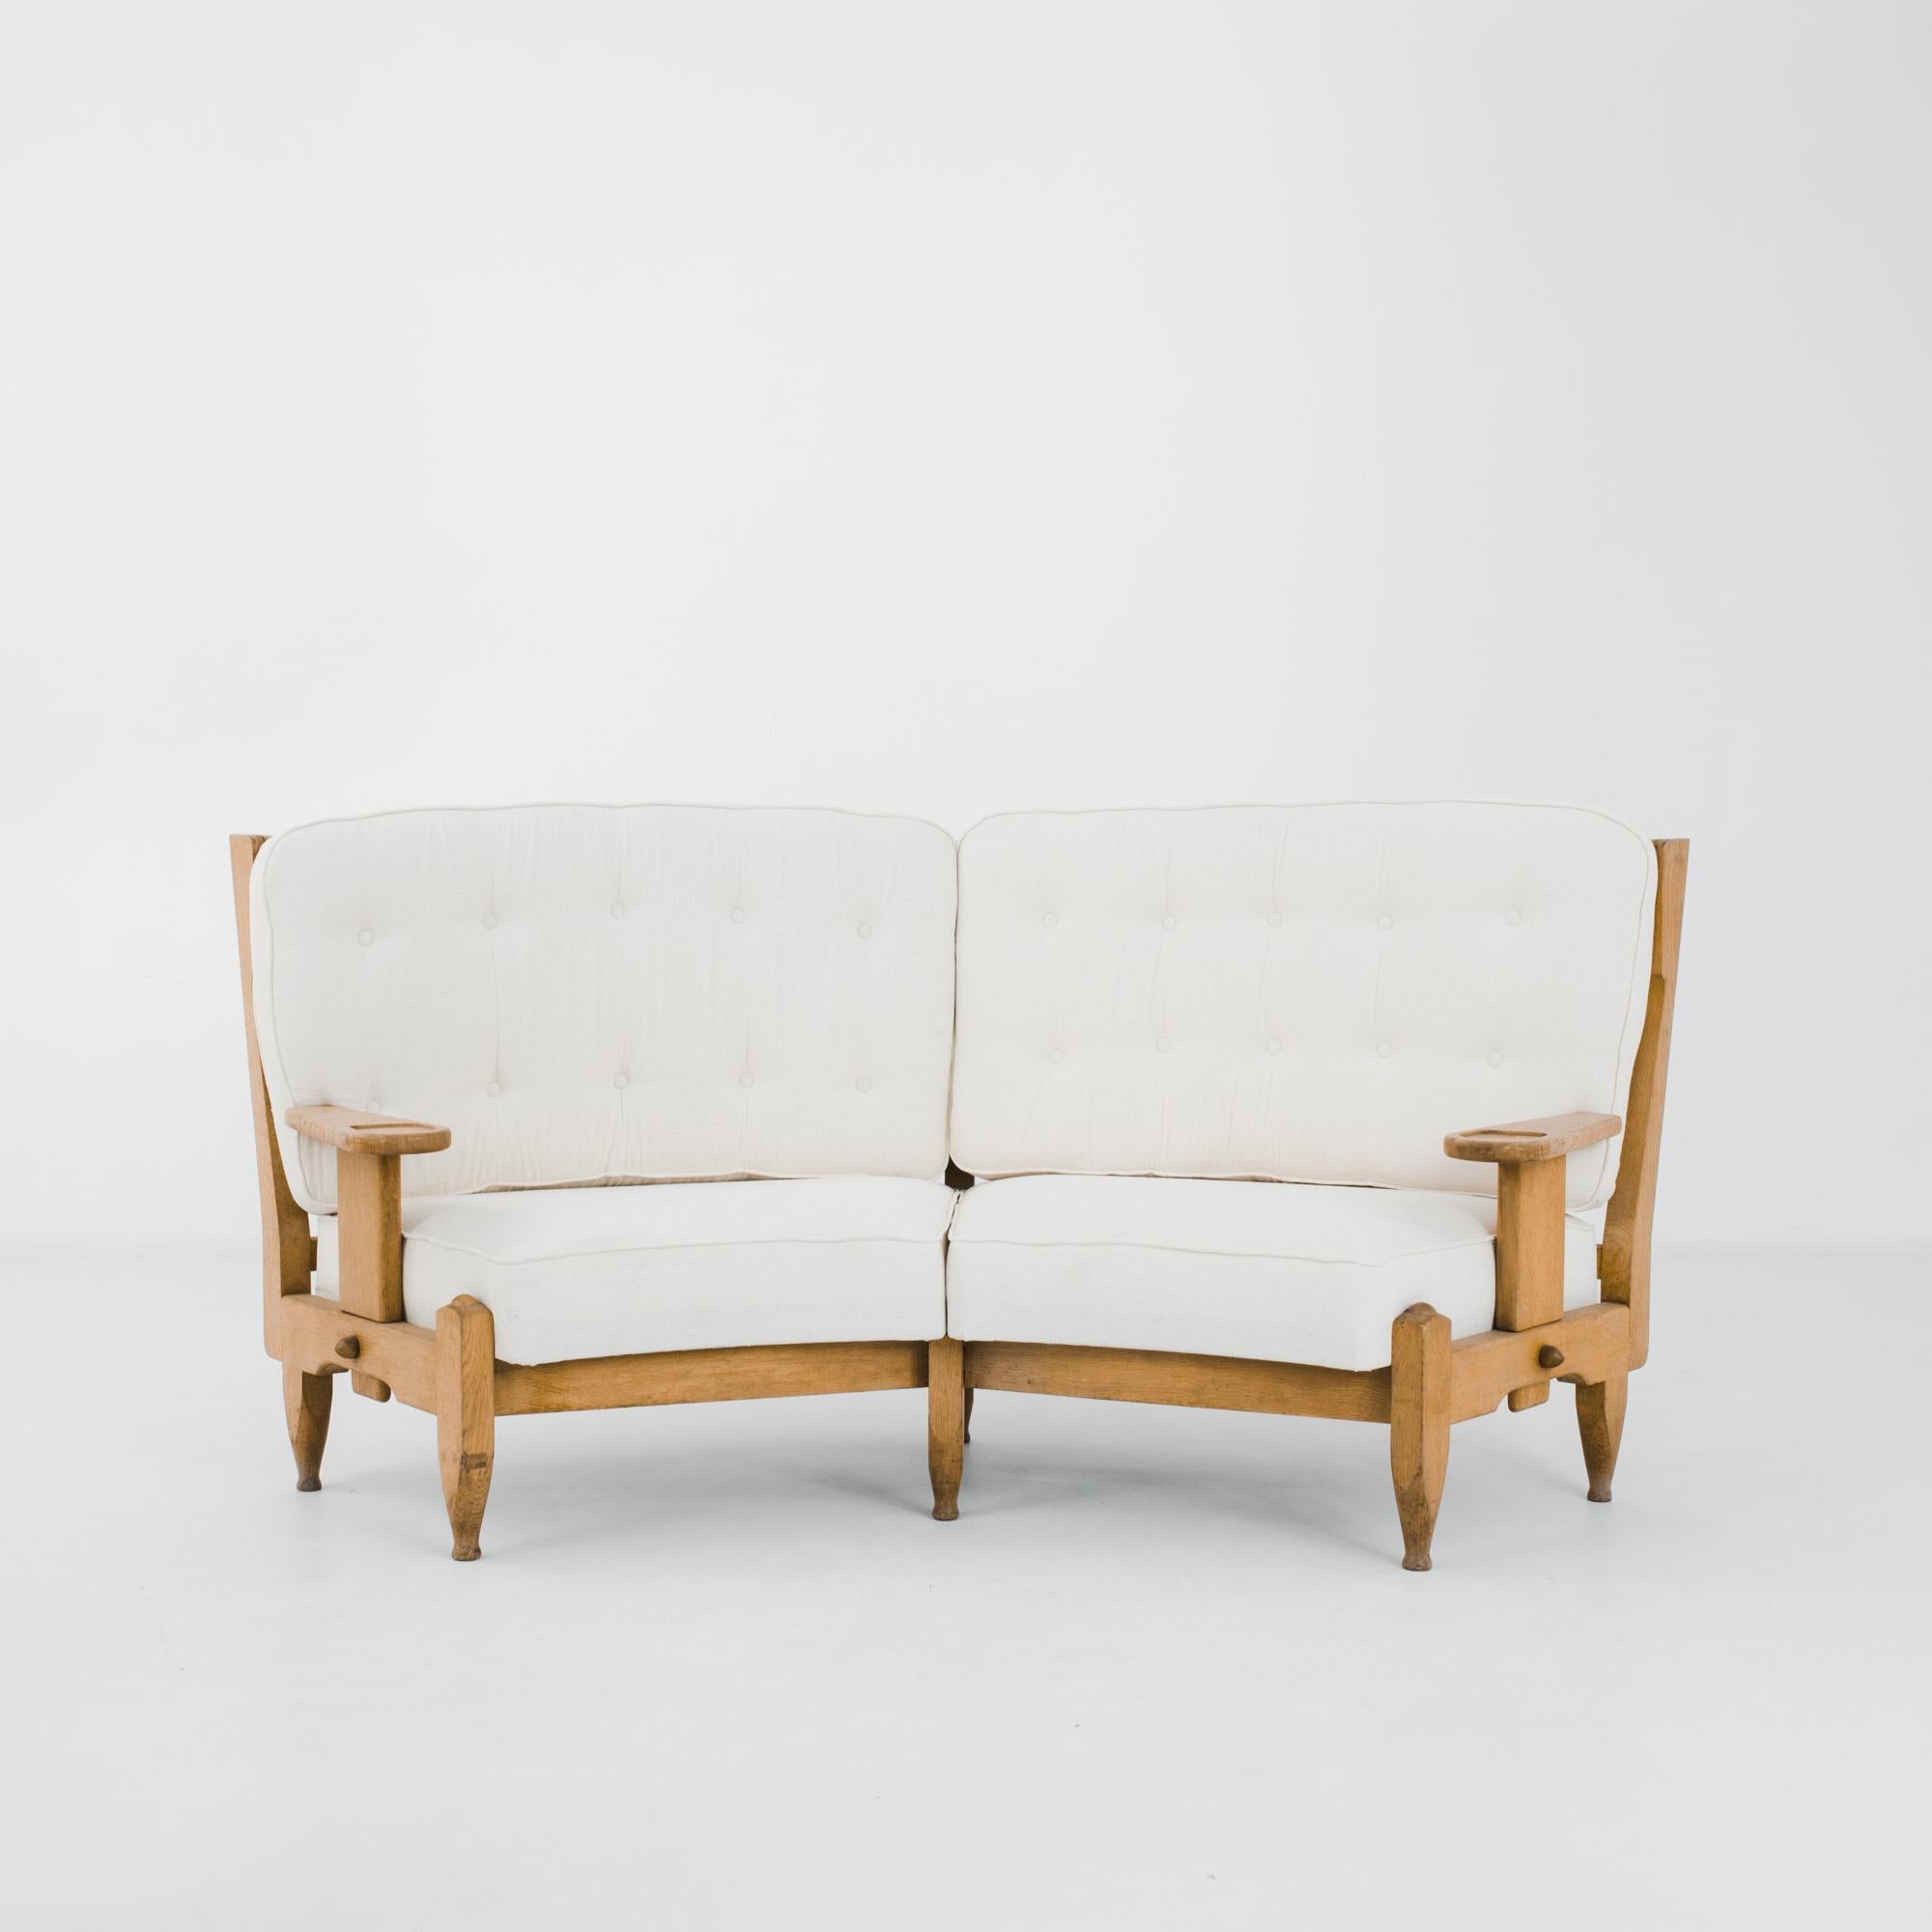 The graceful curve of this oak sofa by French designers Guillerme et Chambron makes an effortlessly elegant impression. Warm oak with a natural finish is fashioned into a light frame; the repeated oval of the back-slats creates an eye-catching